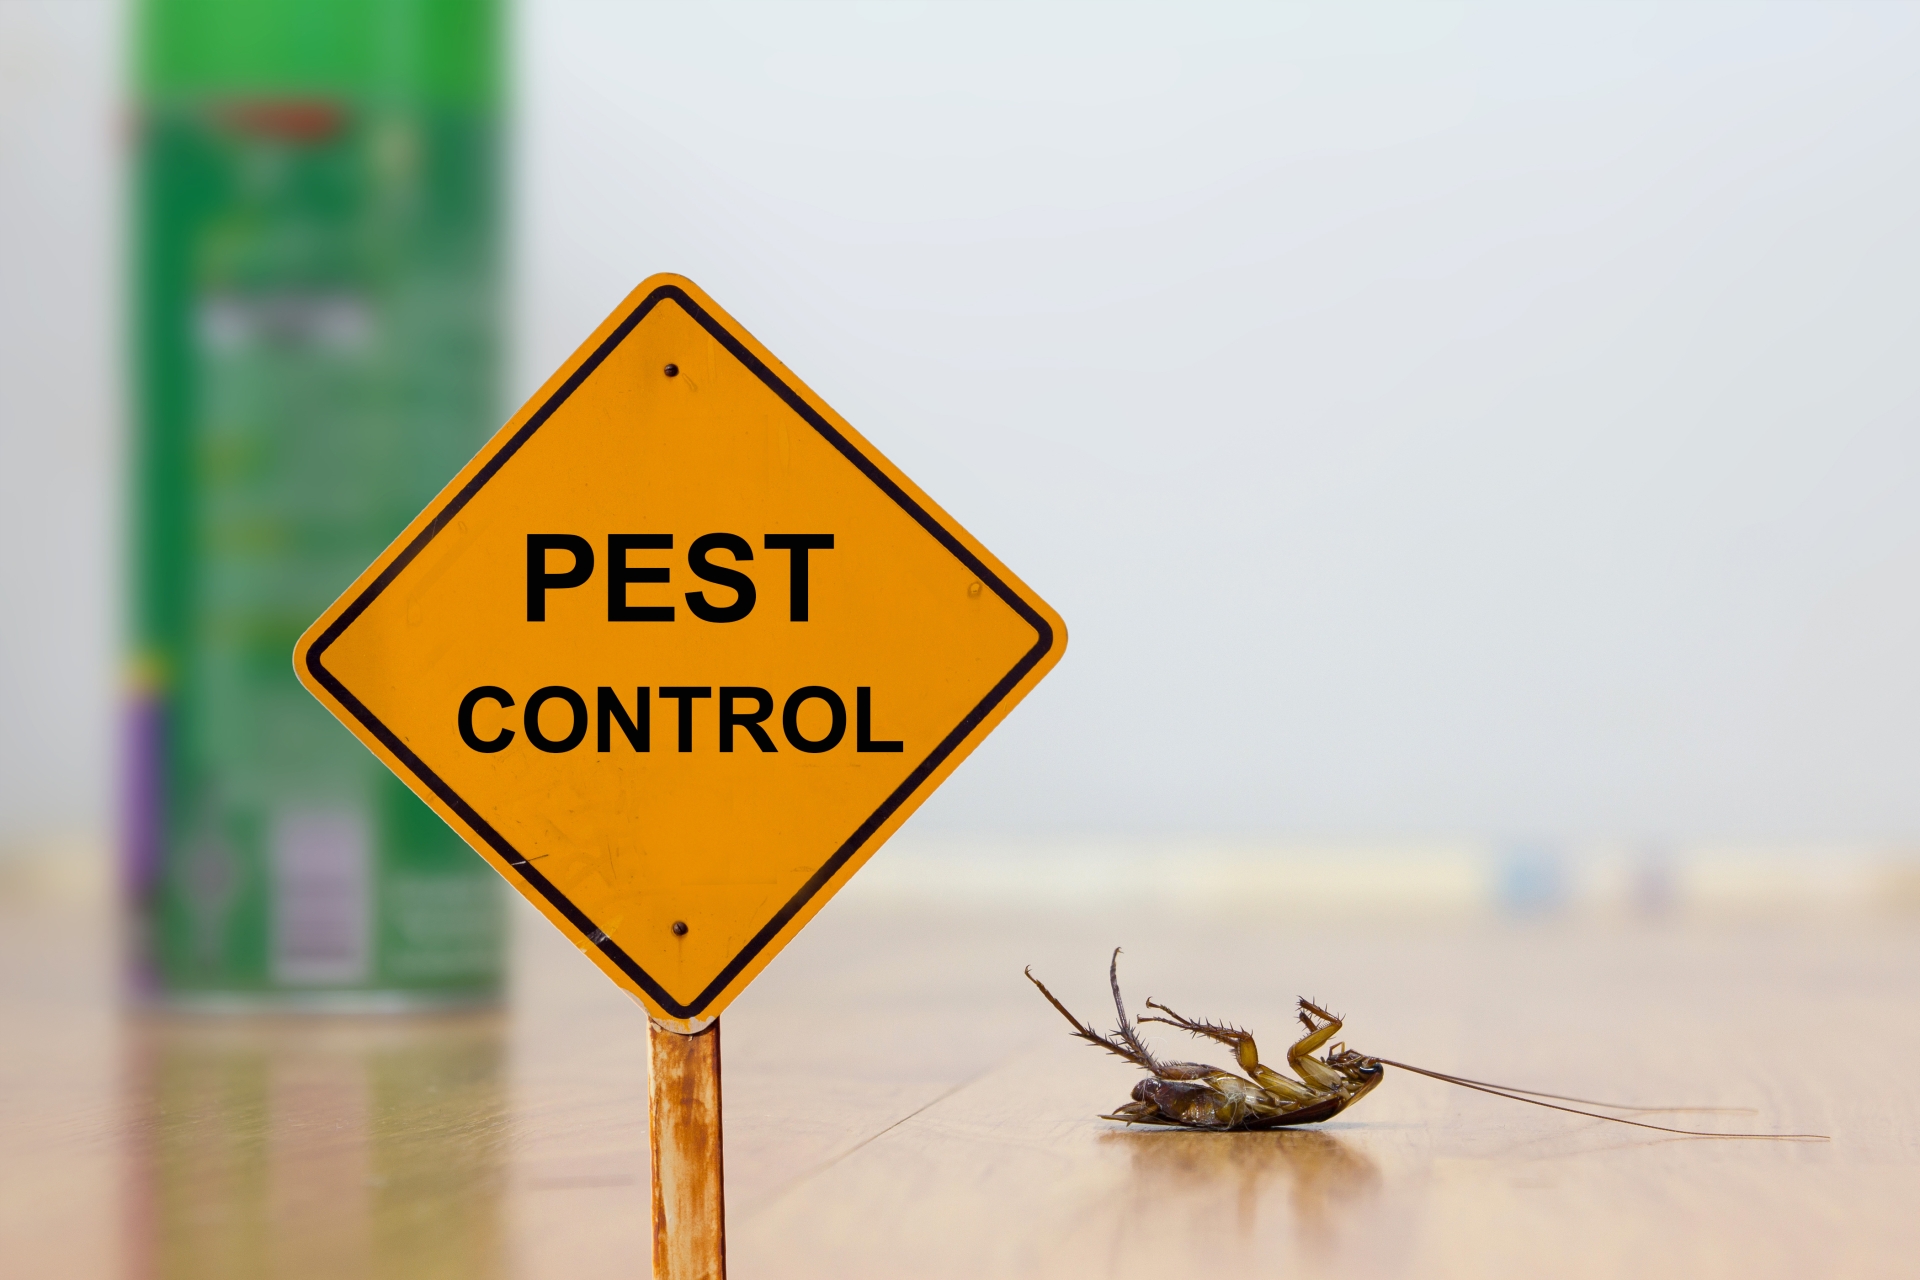 24 Hour Pest Control, Pest Control in Charlton, SE7. Call Now 020 8166 9746